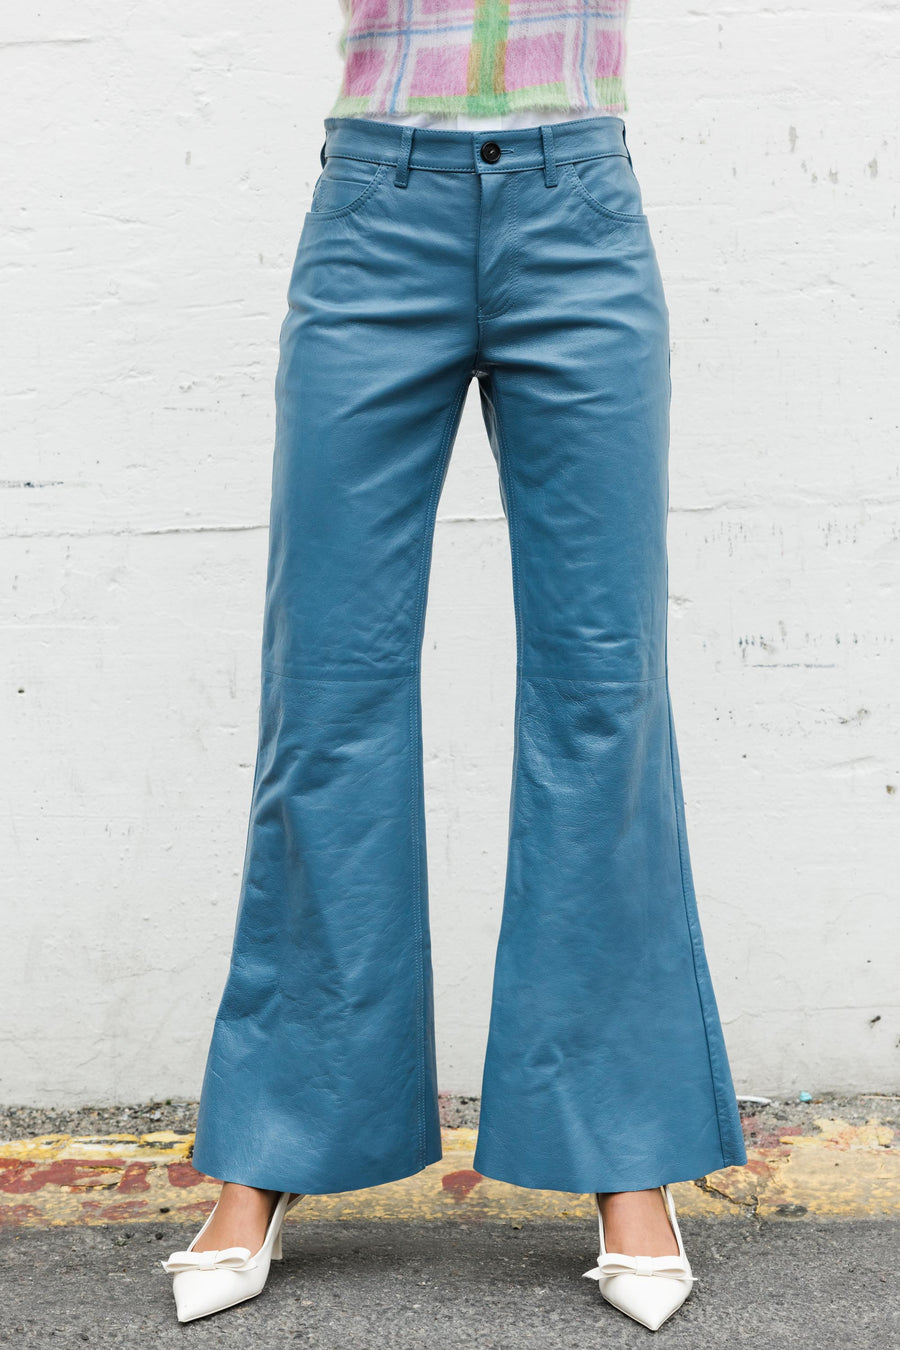 SS24 Marni Leather Pants in Blue